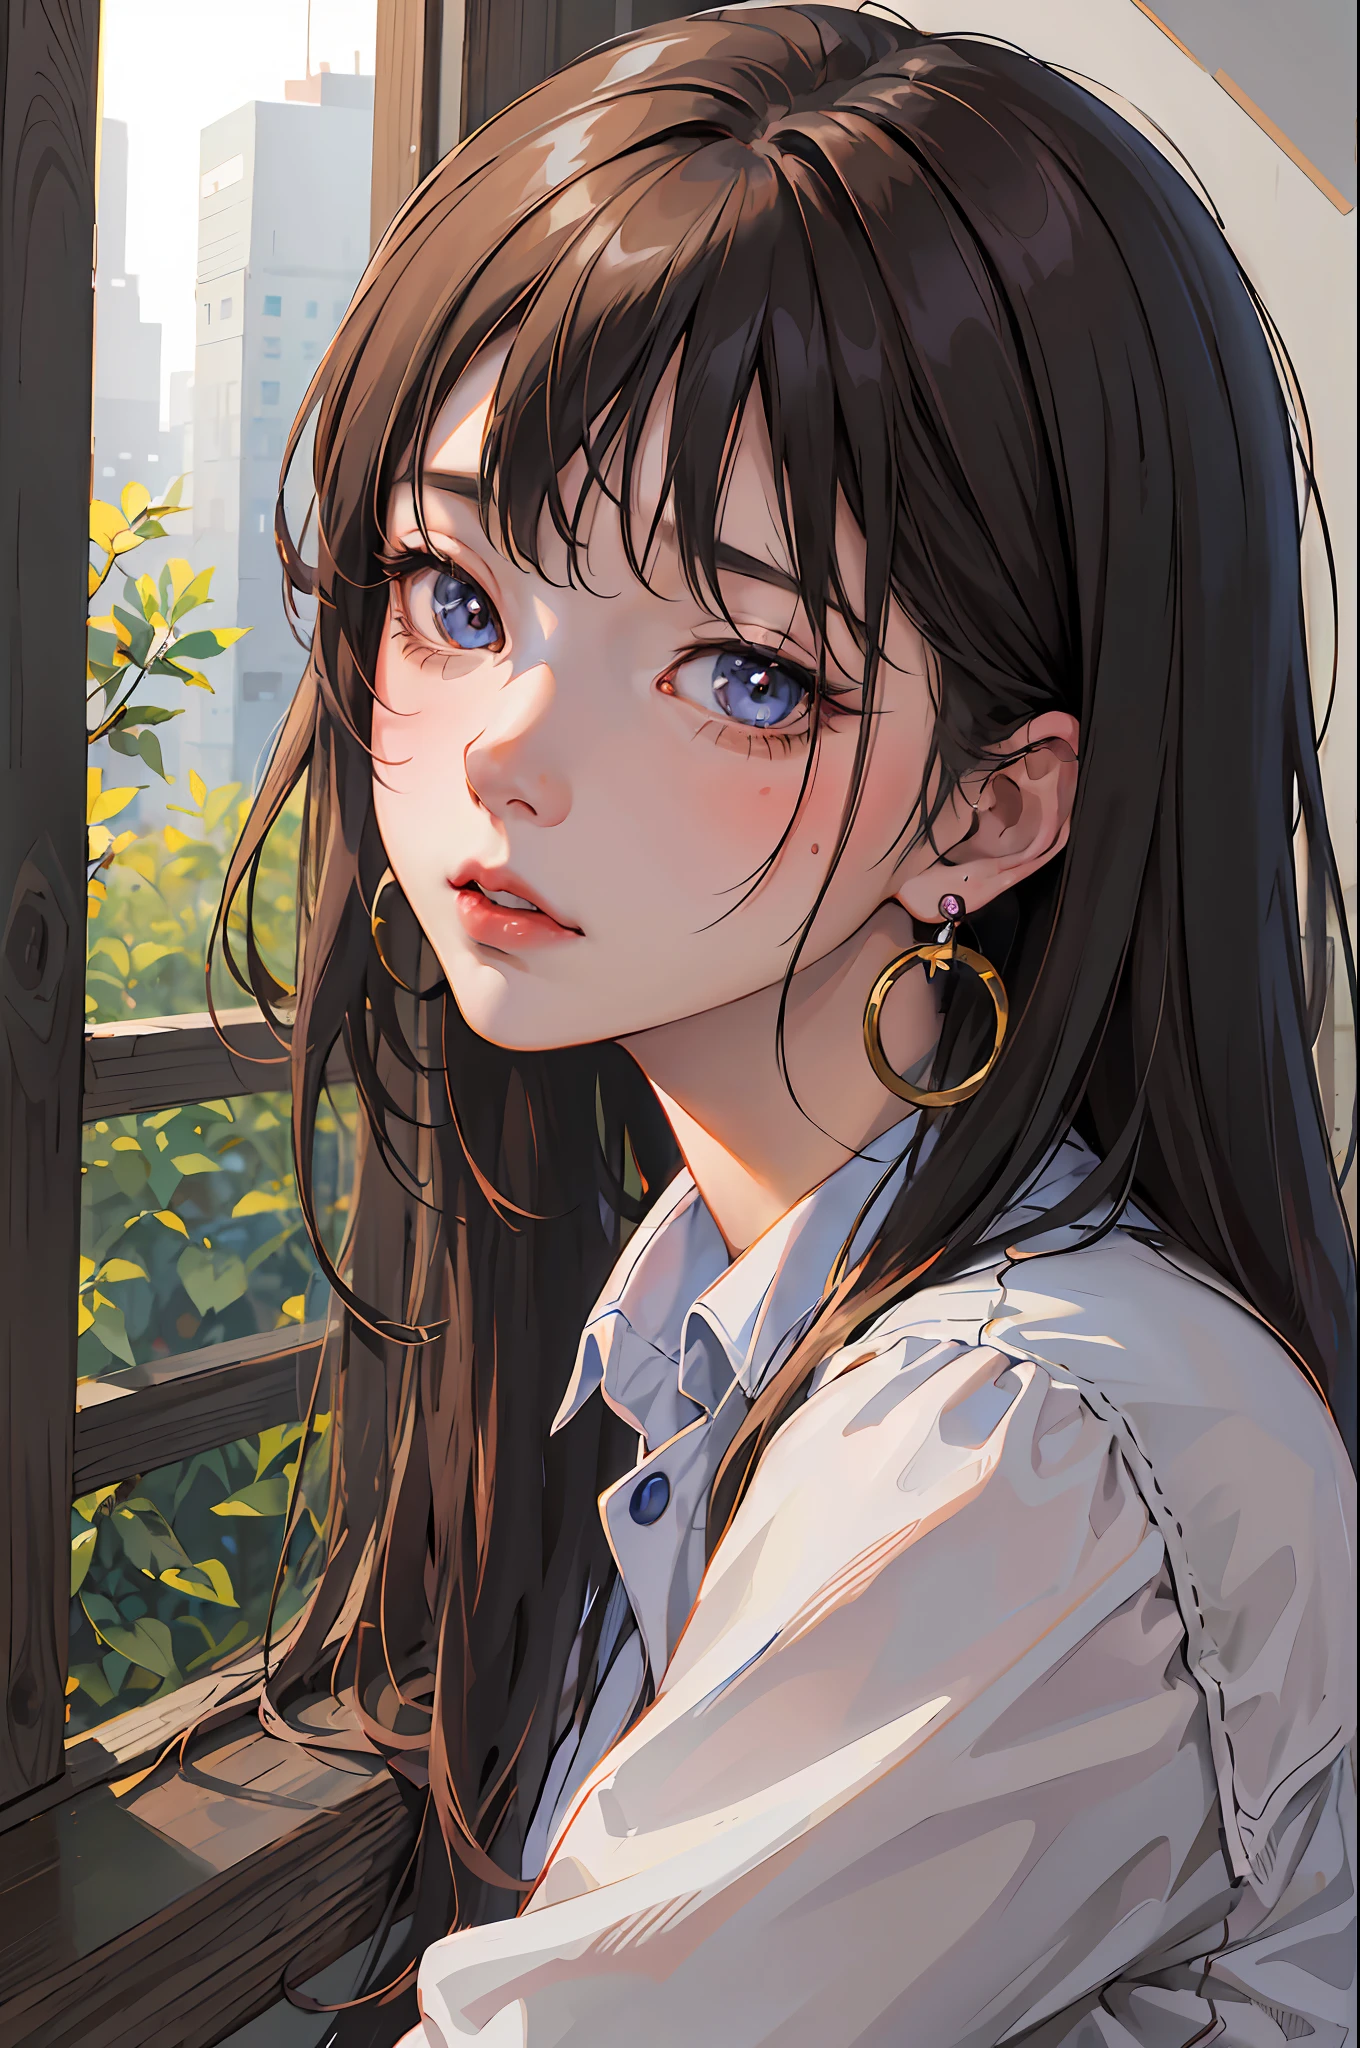 anime girl with long hair looking out of window with city in background, beautiful anime portrait, detailed portrait of anime girl, kawaii realistic portrait, portrait anime girl, artwork in the style of guweiz, realistic anime artstyle, portrait of an anime girl, cute anime girl portrait, realistic anime art style, digital anime illustration, anime style portrait, stunning anime face portrait